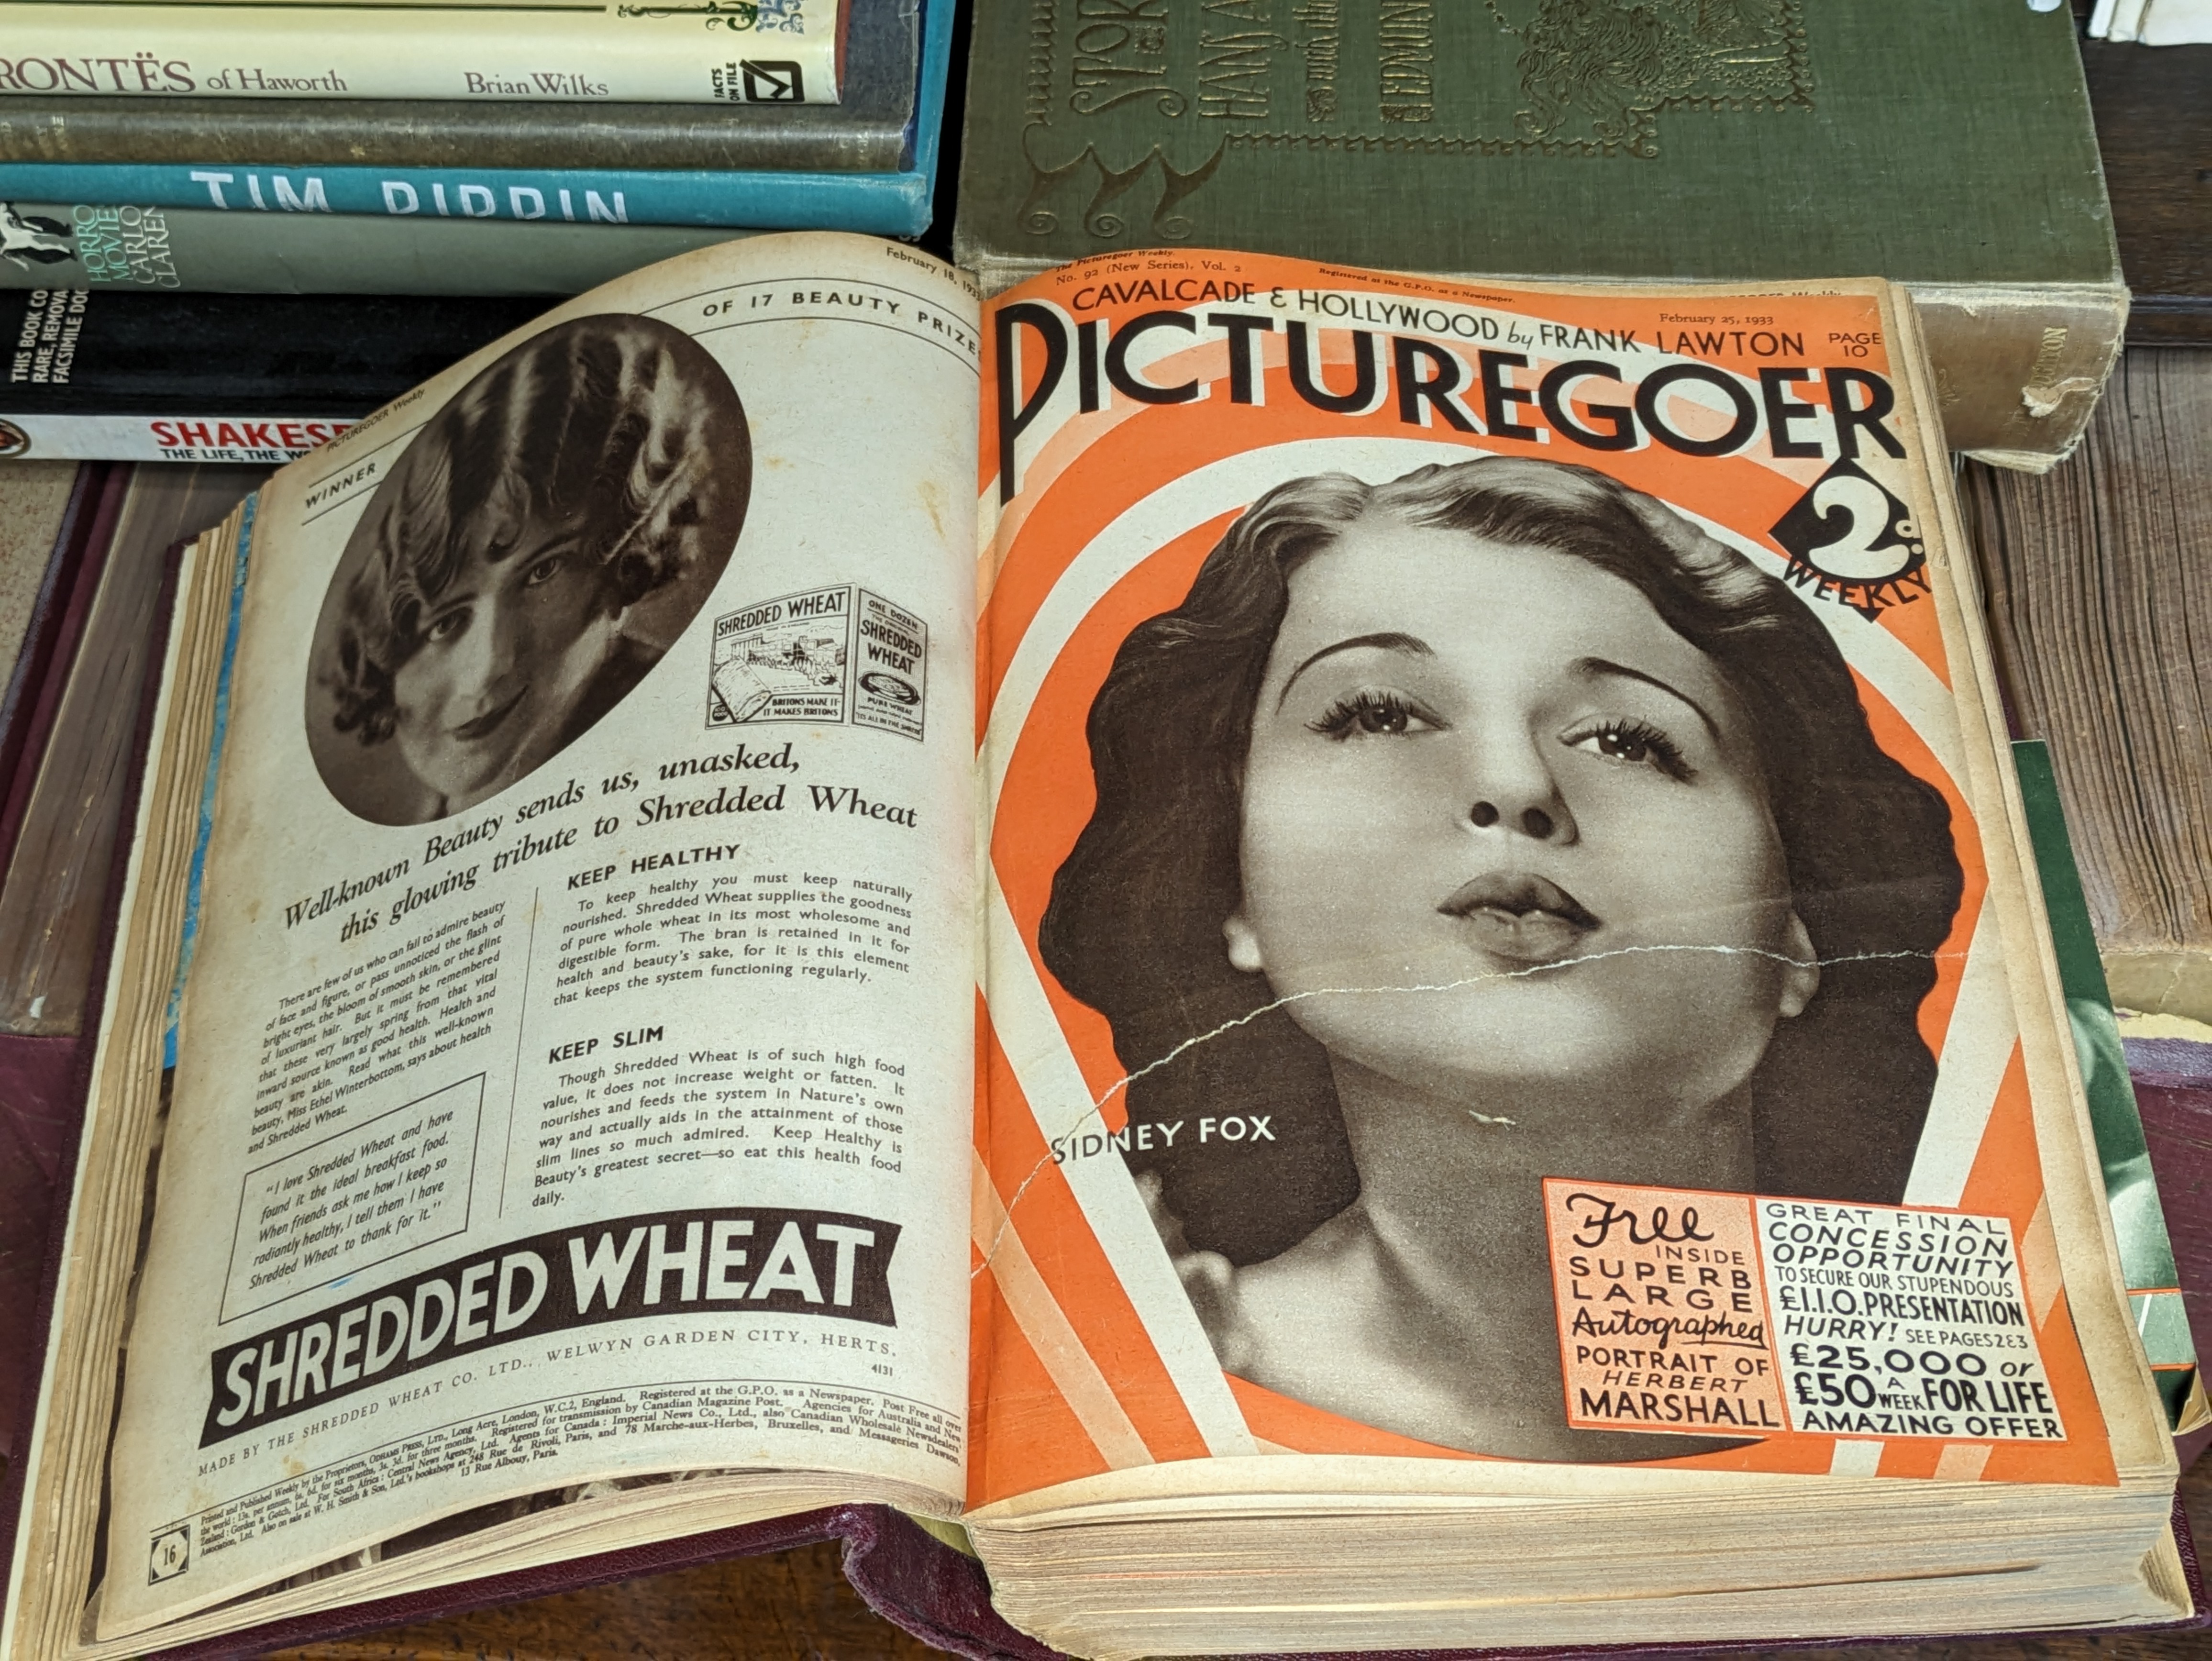 Twenty-five bound volumes of “Picturegoer” magazine circa. 1919-1949 (all covers appear to be presen - Image 26 of 36